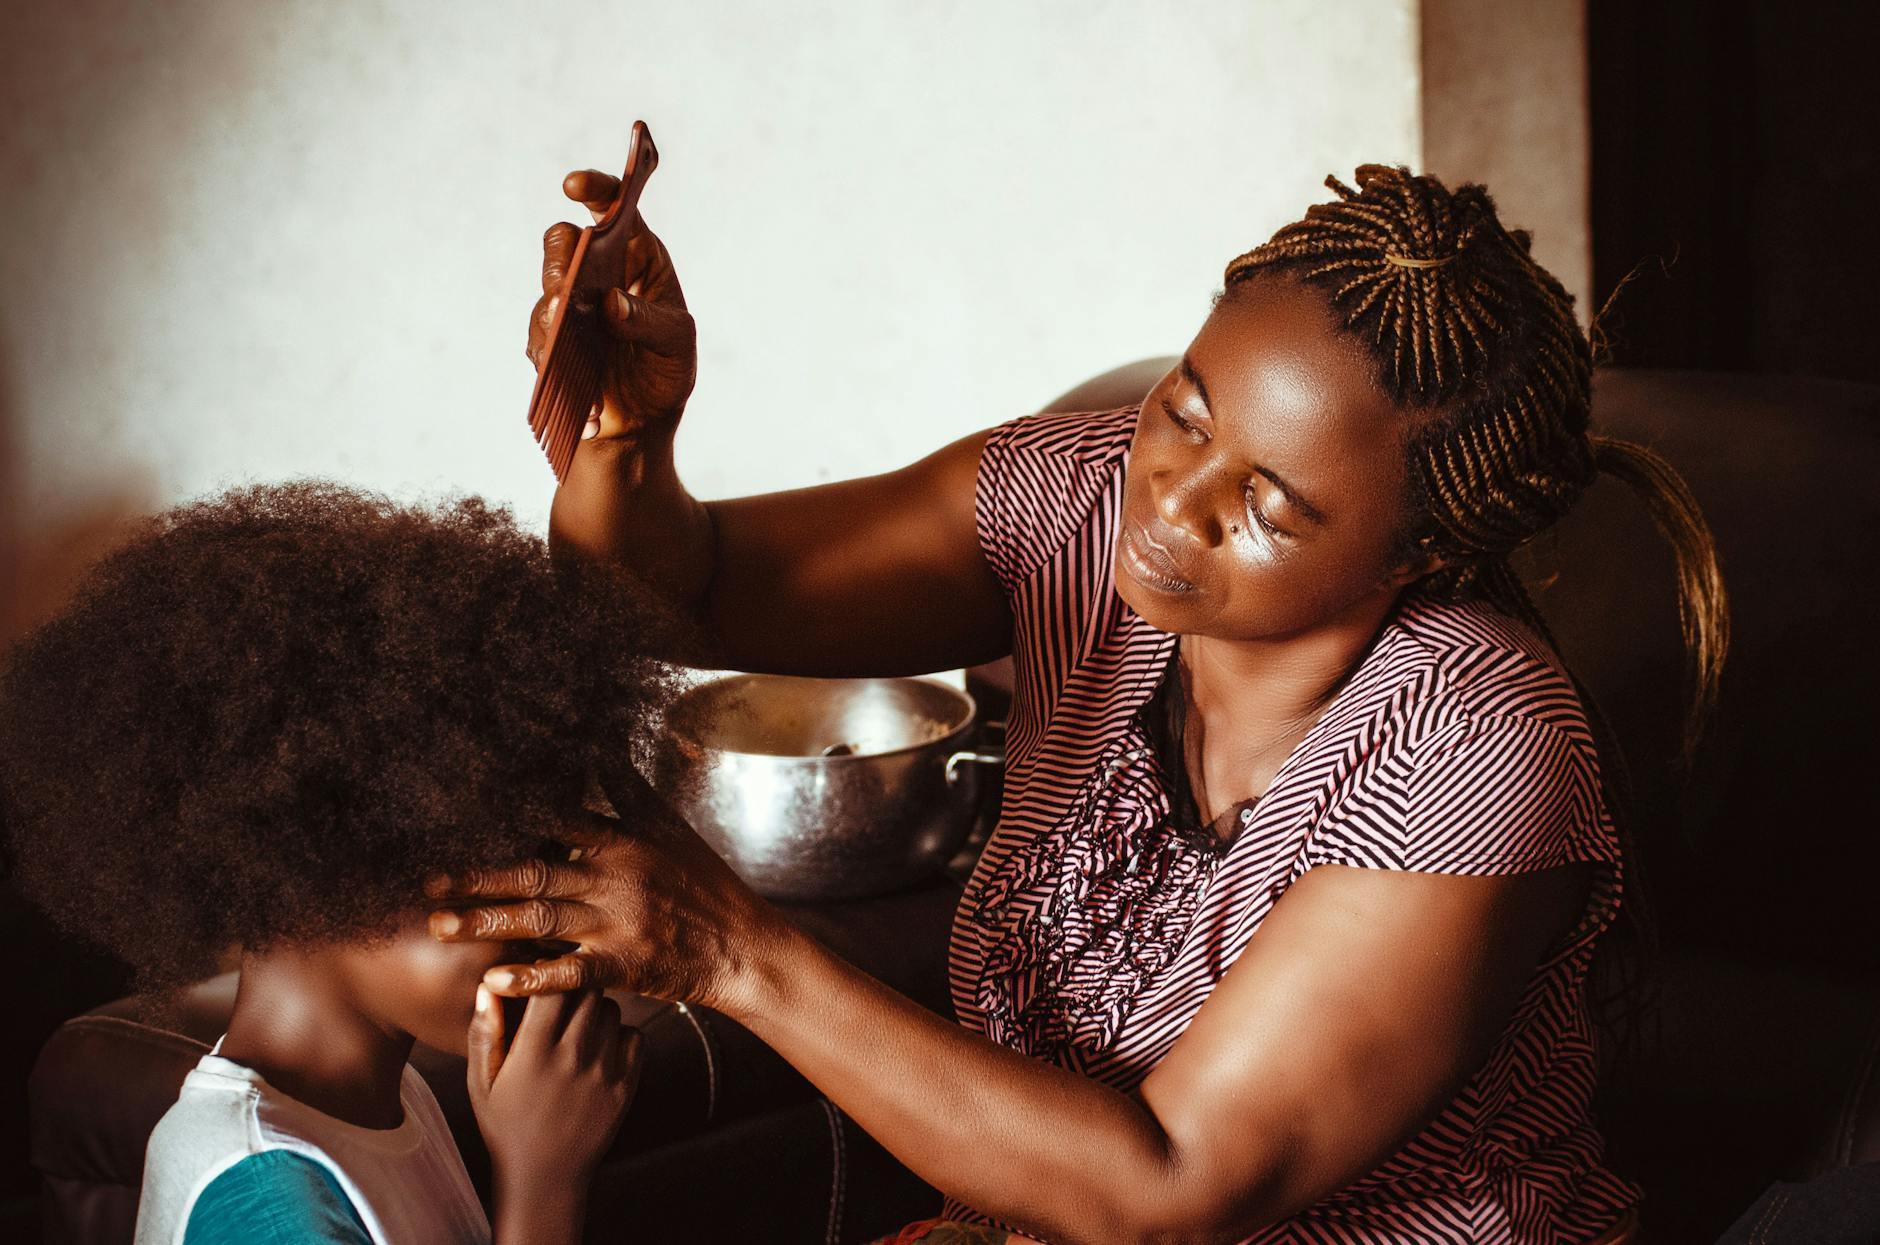 A woman is combing the hair of a child